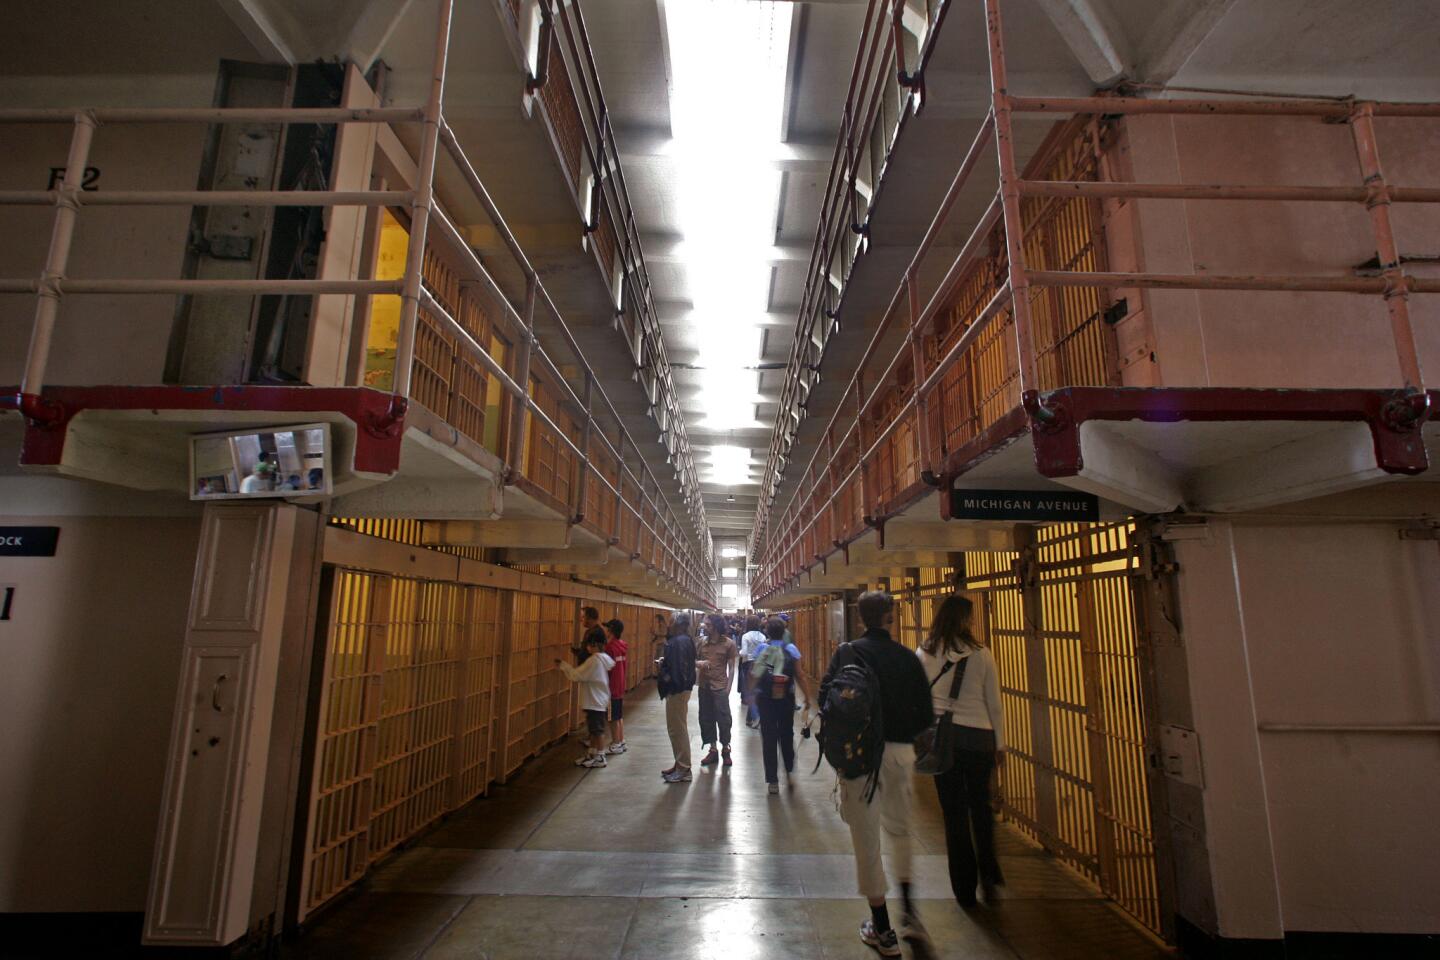 Visitors check out cells at Alcatraz, once home to a federal prison. Great city views are had on the boat ride over to the island in San Francisco Bay.